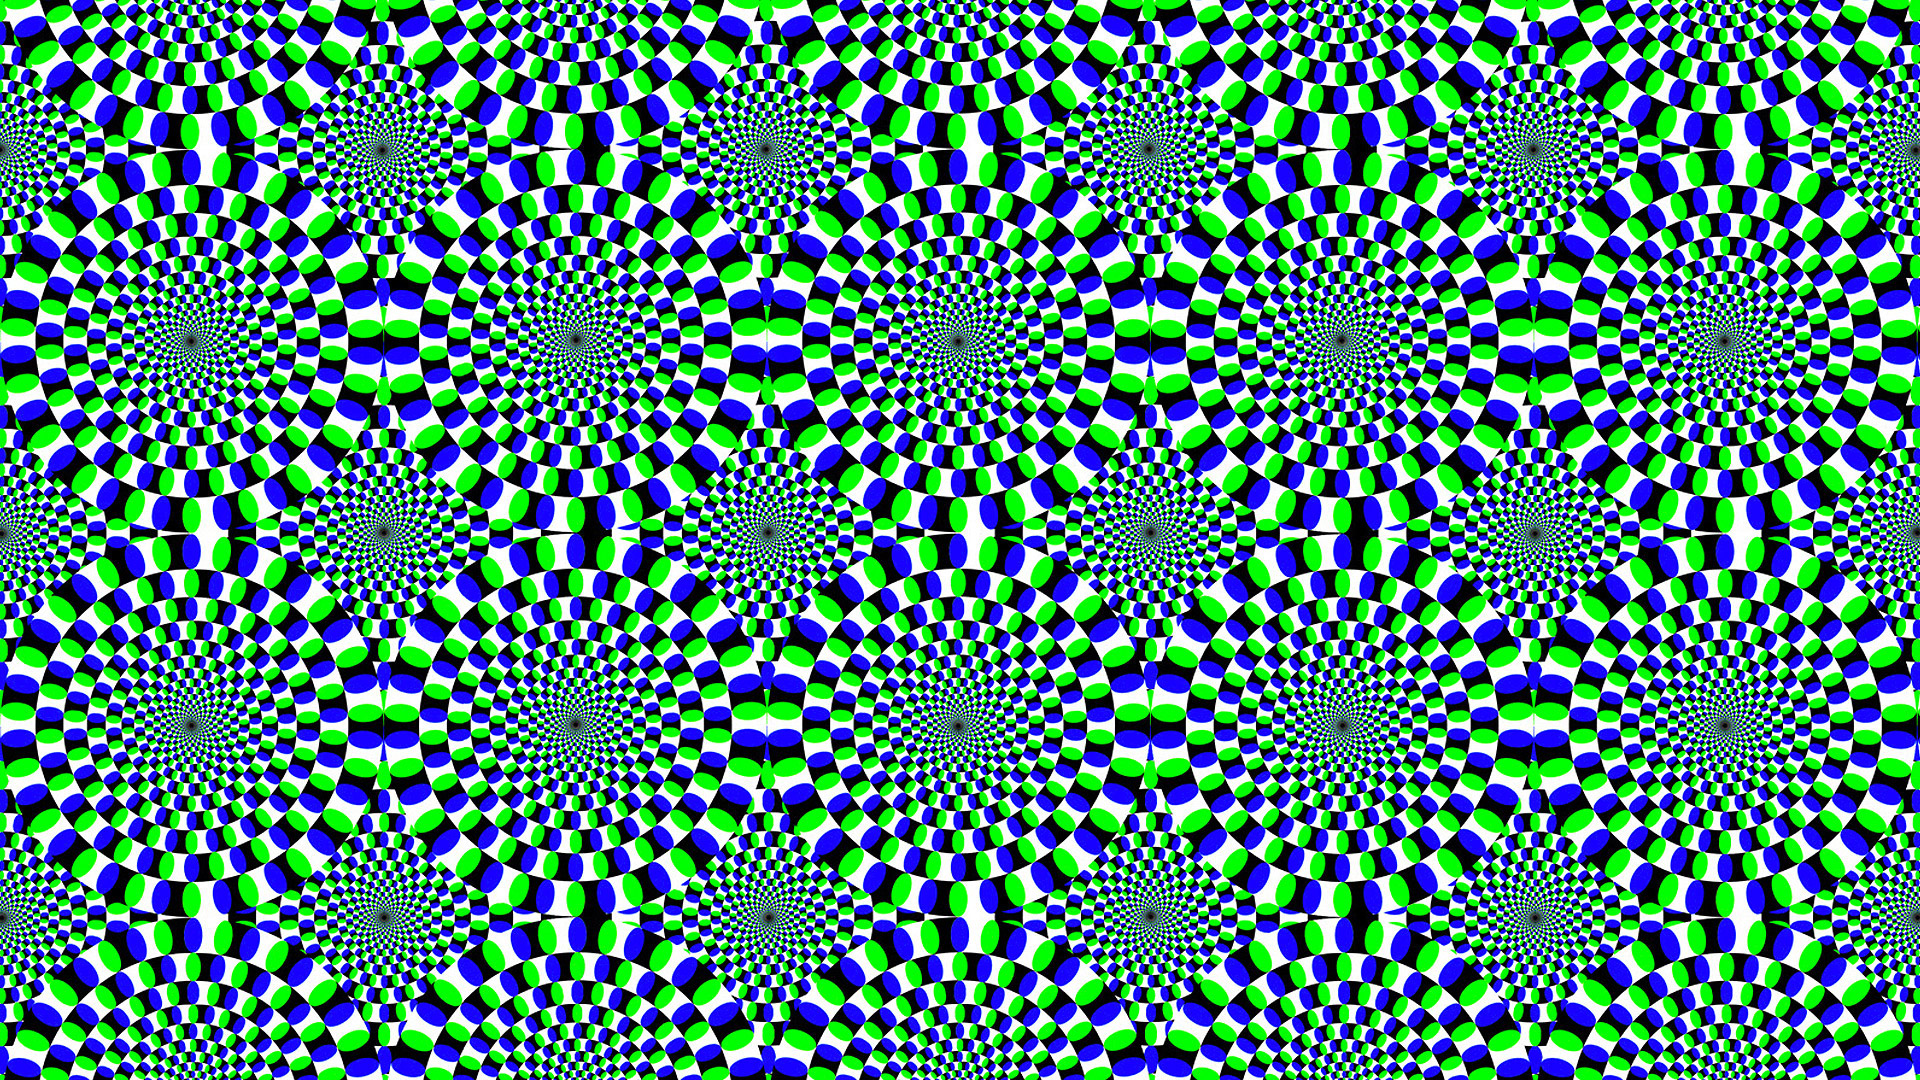 Trippy Optical Illusions That Appear to be Animated (Use as Phone Wallpaper  if You Want to go Crazy) – BOOOOOOOM! – CREATE * INSPIRE * COMMUNITY * ART  * DESIGN * MUSIC * FILM * PHOTO * PROJECTS